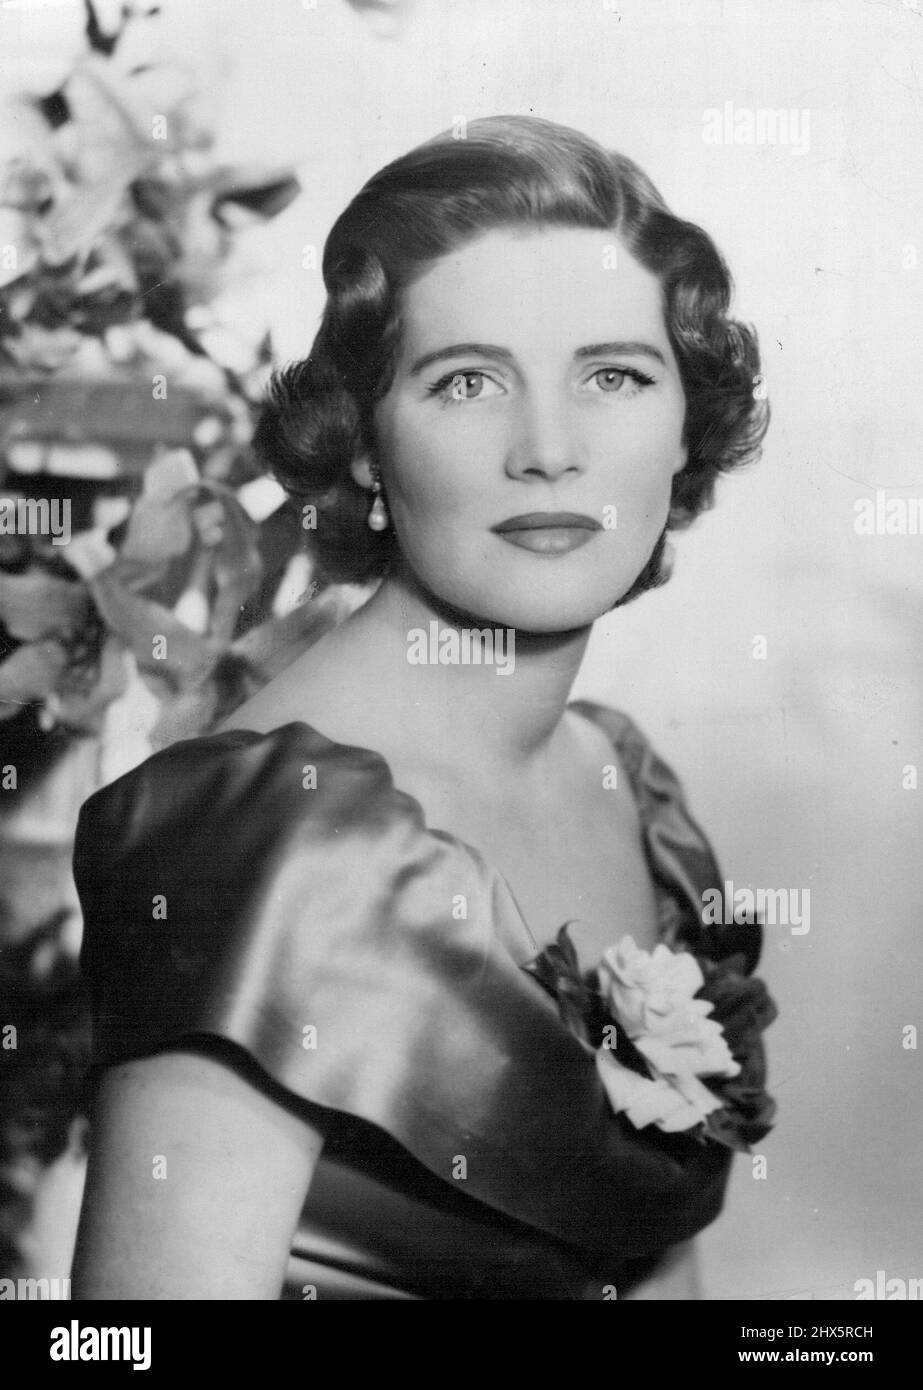 The Churchill Family: Mrs. Christopher Somaes - Wife of Captain Christopher Soames, Conservative Member of Parliament for Bedford; formerly Miss Mary Churchill, youngest daughter of Sir Winston and Lady Churchill. Married in 1947, they have two sons and two daughters. October 26, 1955. (Photo by Vivienne, Camera Press). Stock Photo